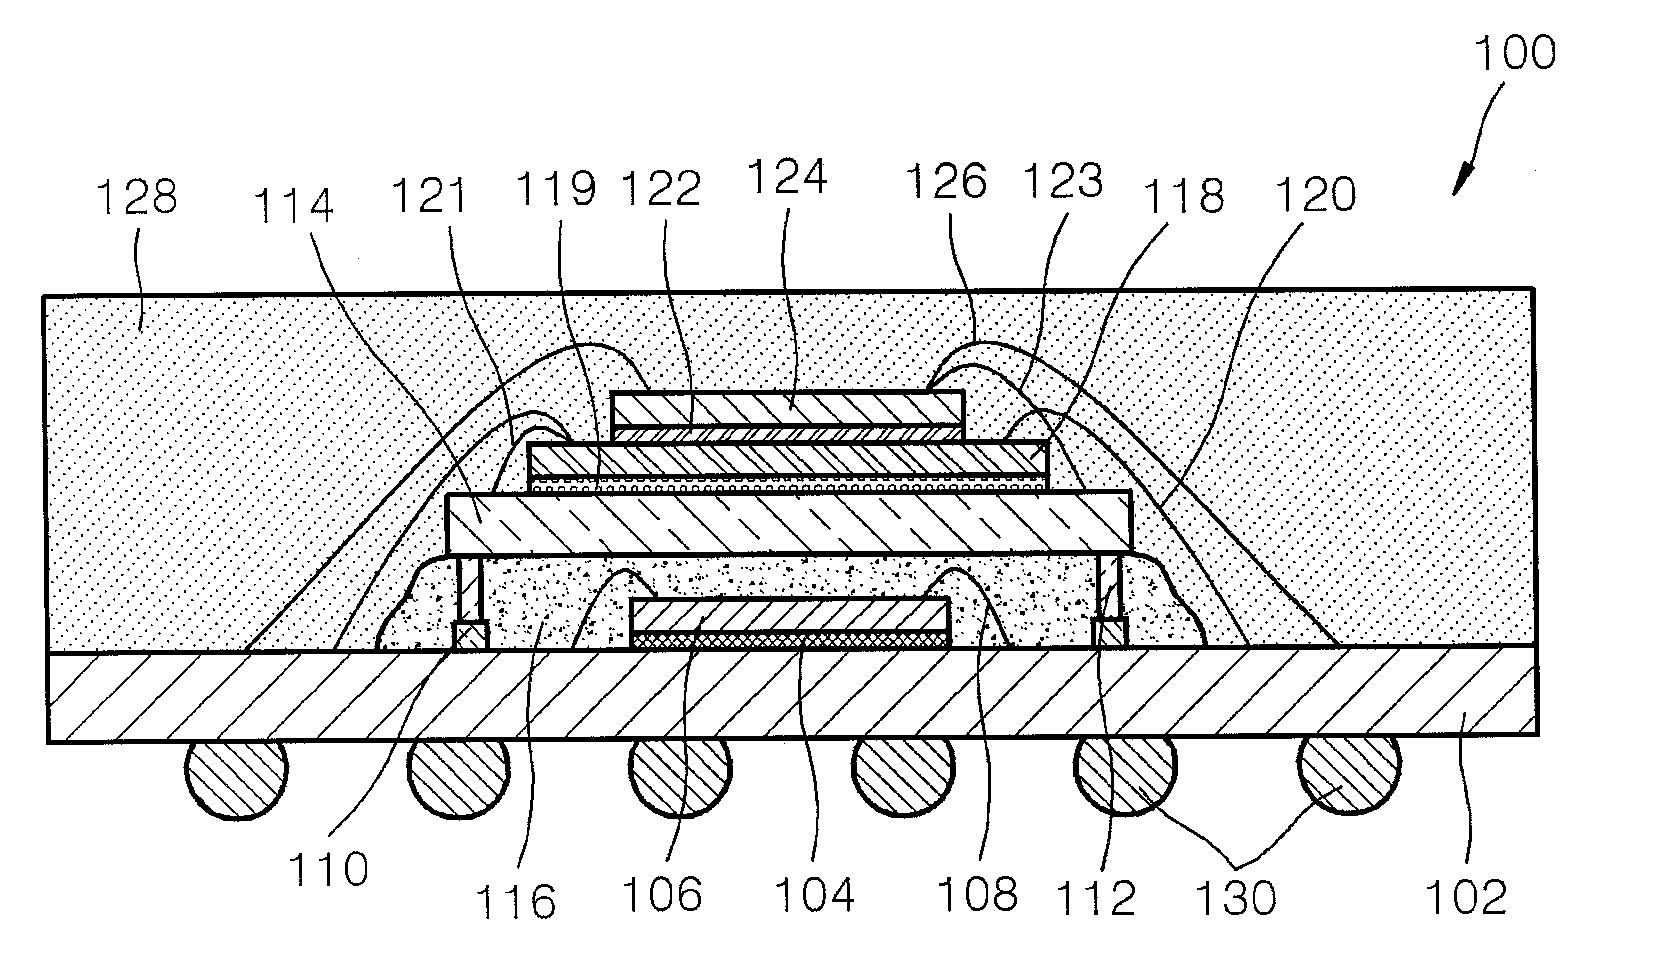 Vertical stack type multi-chip package having improved grounding performance and lower semiconductor chip reliability